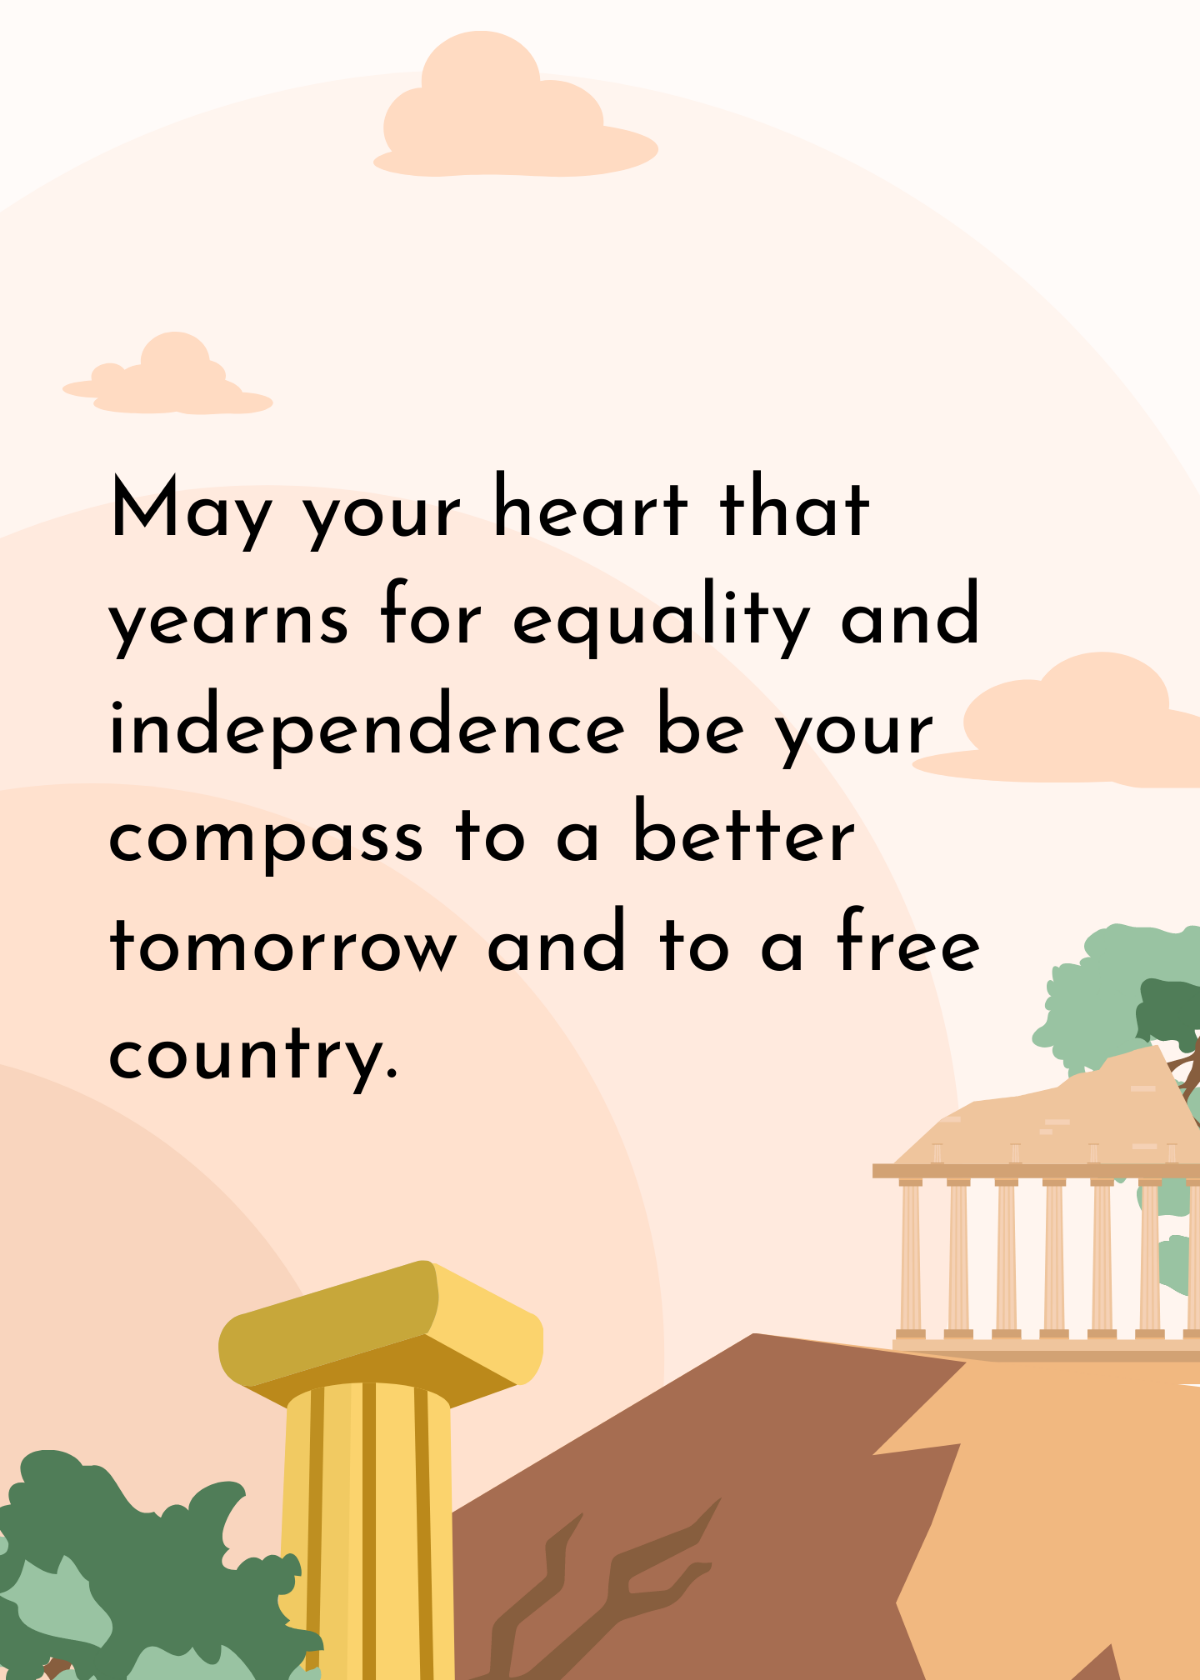 Cyprus National Day Wishes Template